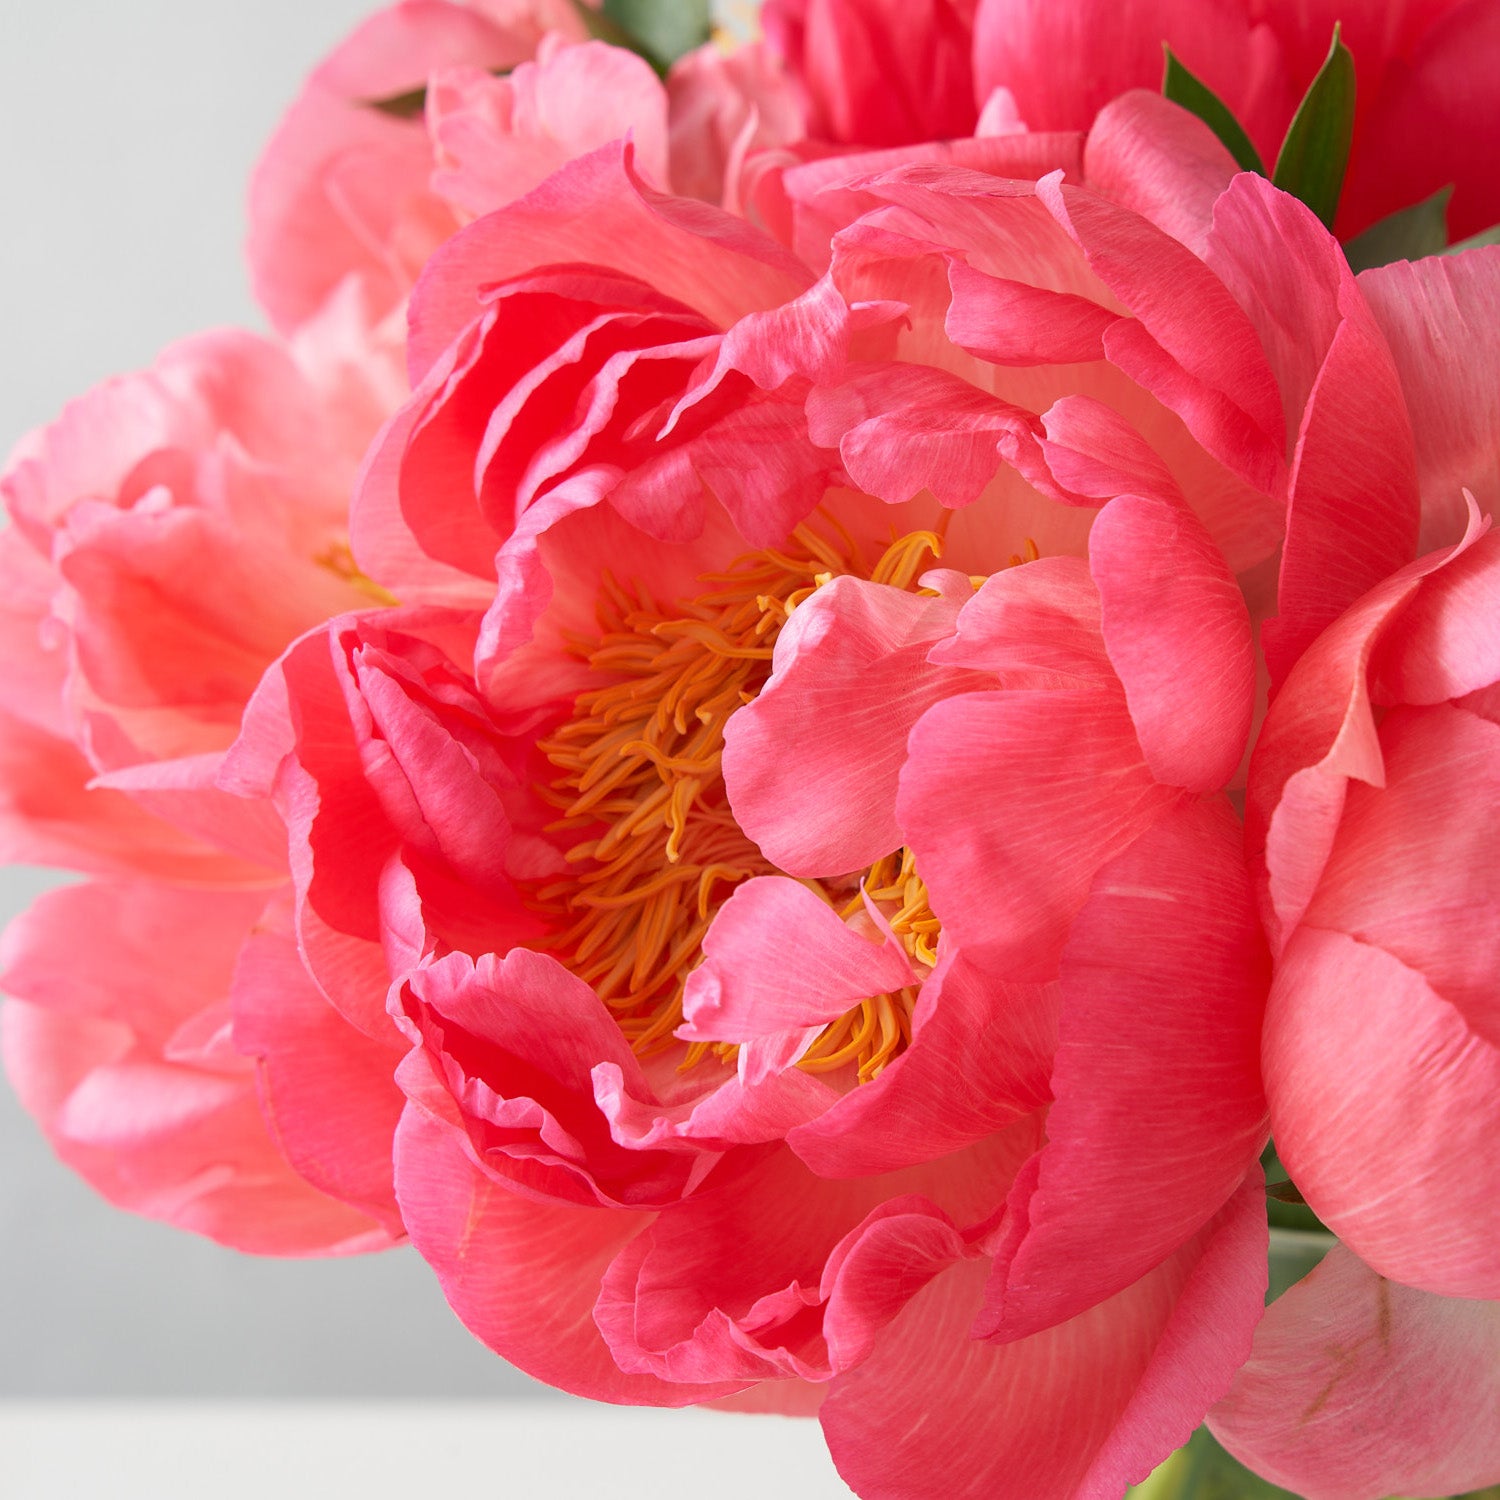 Coral sunset peonies with yellow interior